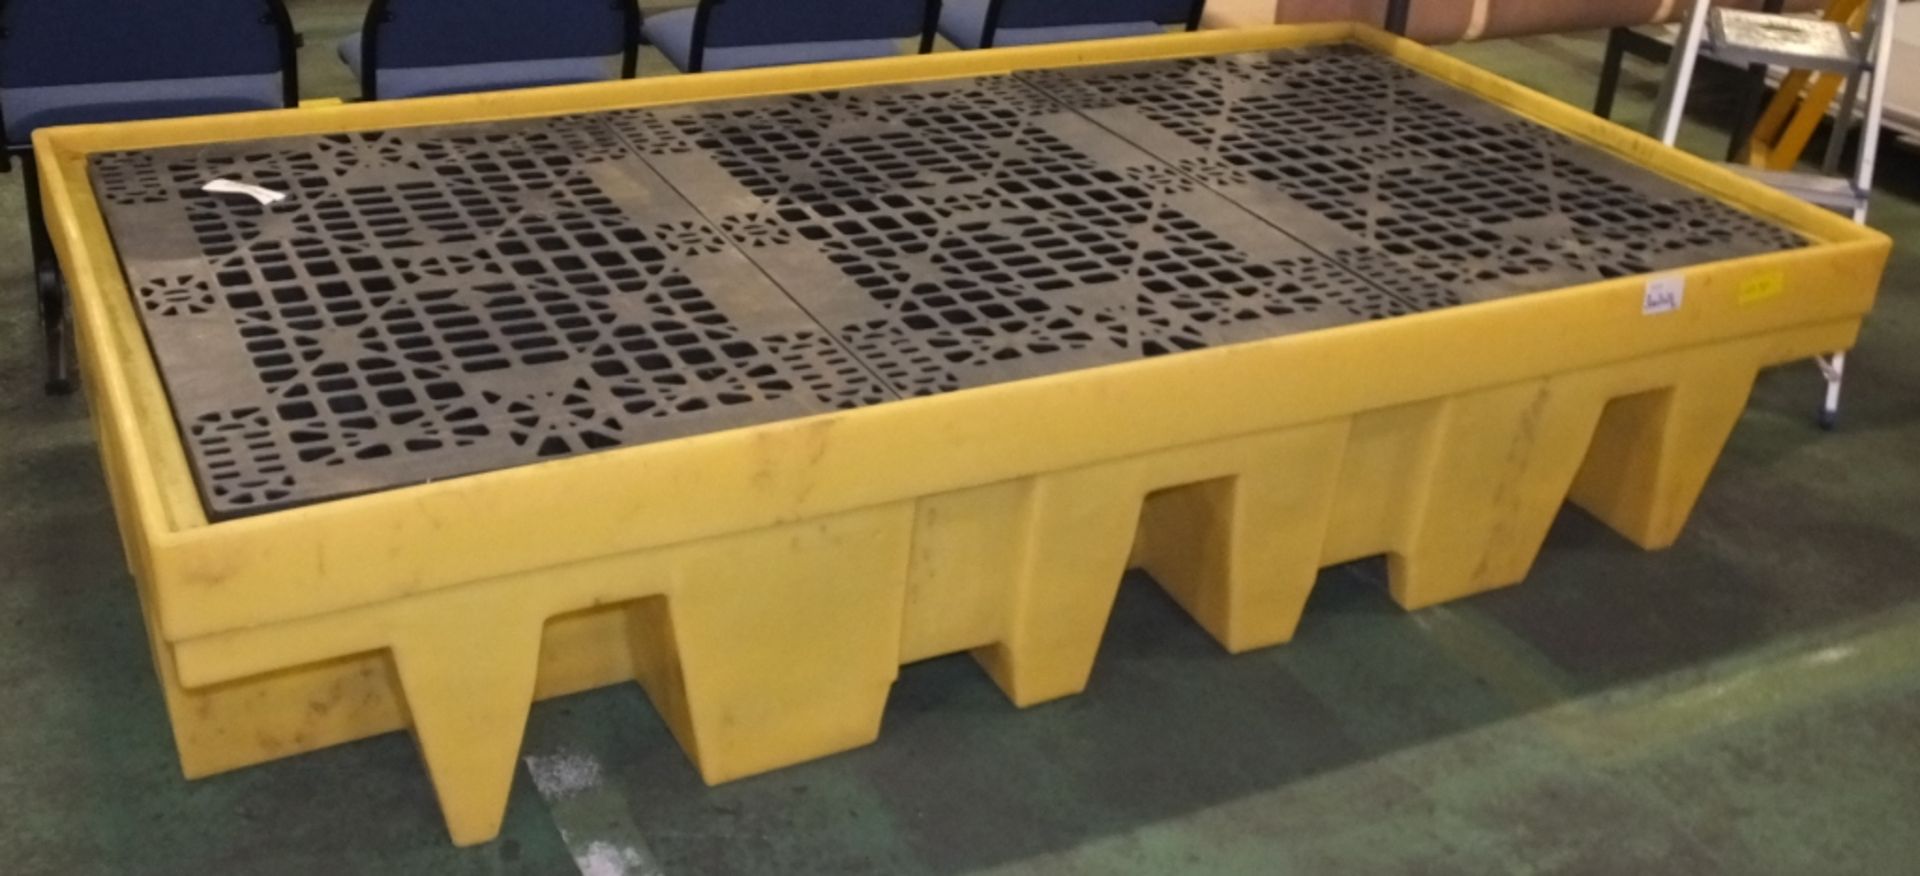 Large Industrial chemical spill tray with removable top sections - 2550 x 1350 x 520